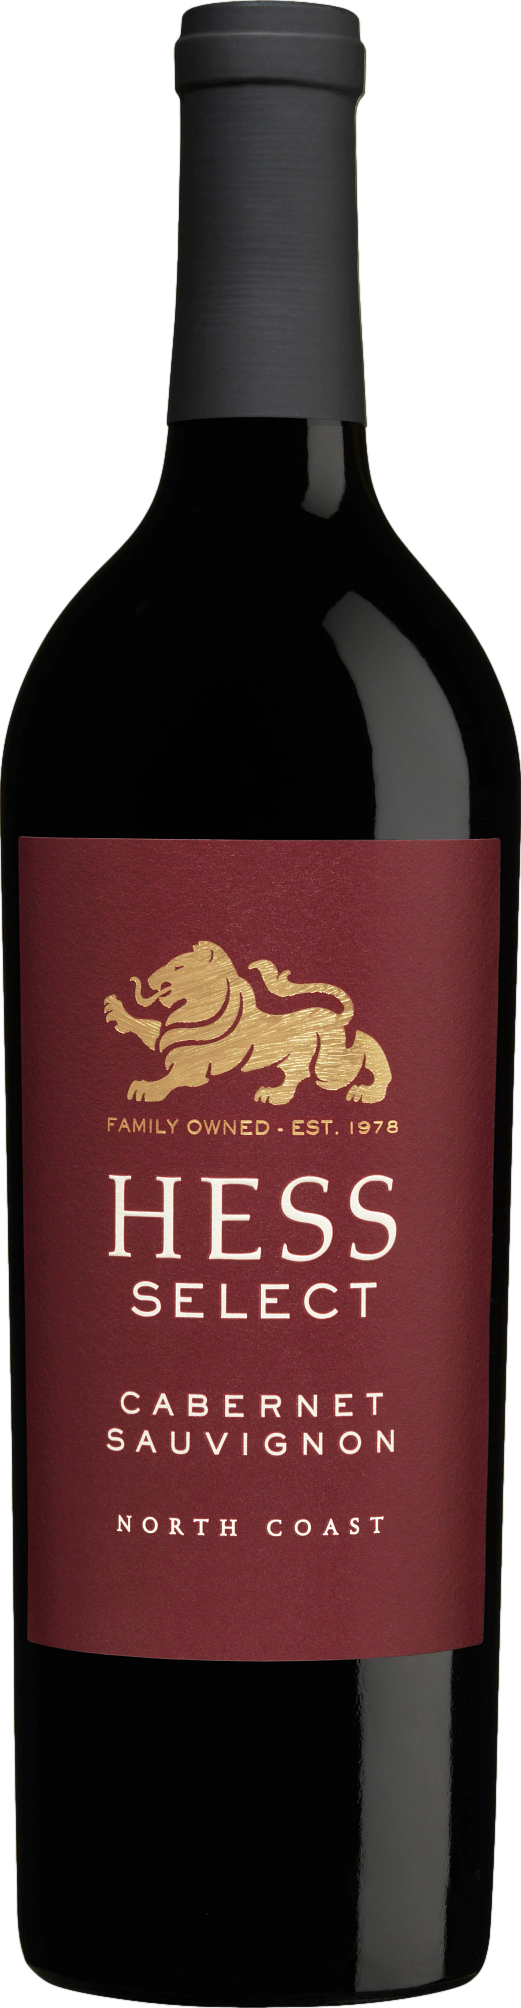 Hess Select Cabernet Sauvignon 2018 Hess Collection 8wines DACH